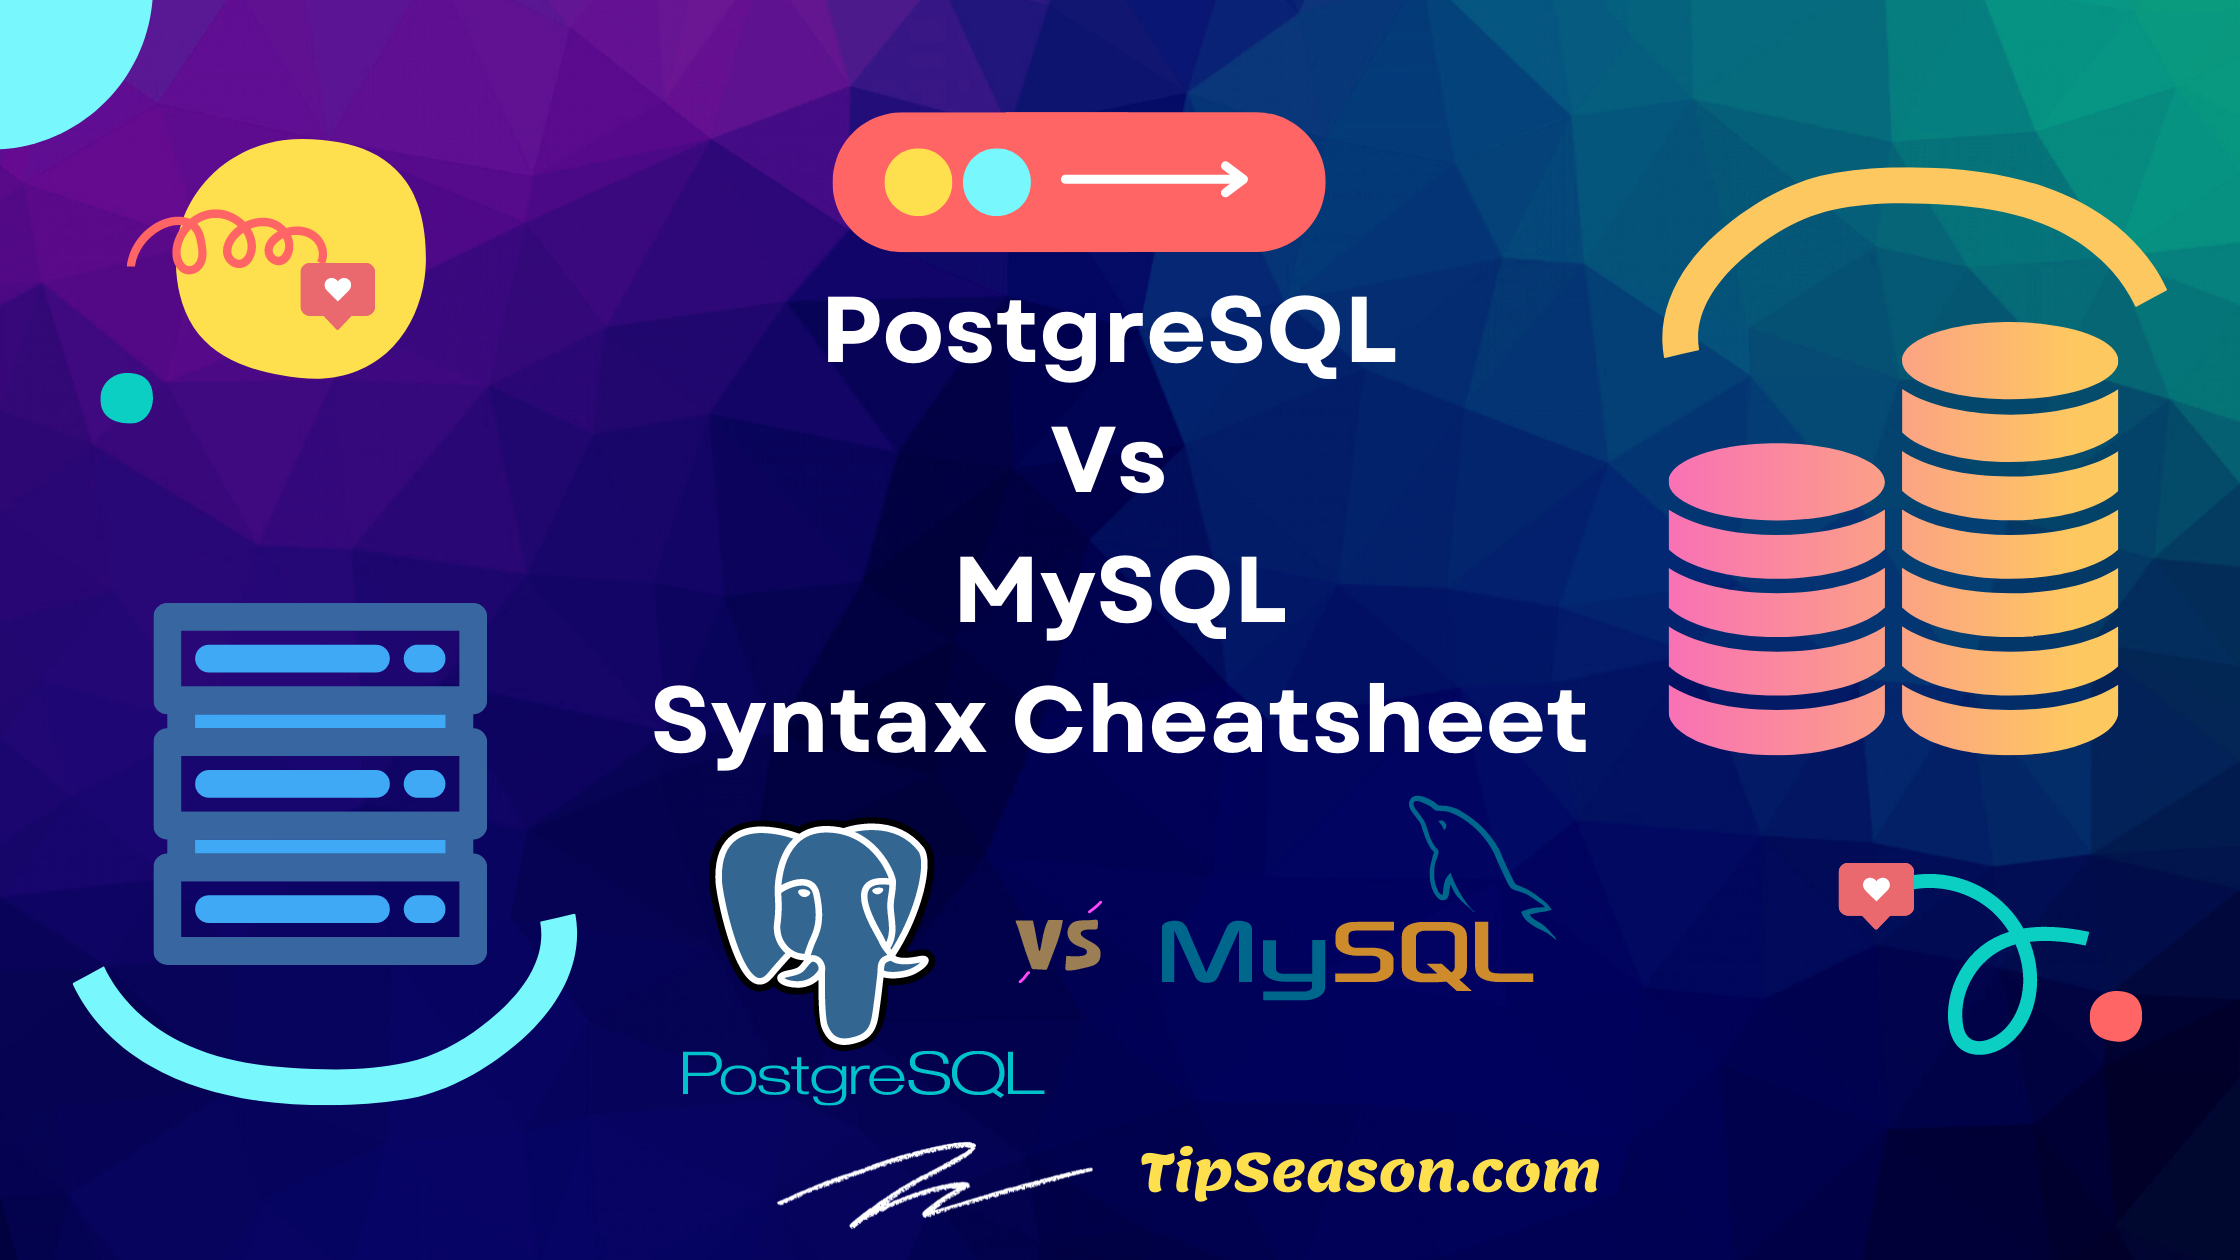 PostgreSQL Vs MySQL differences in syntax - side by side comparison cheatsheet for show databases, tables, schemas and more